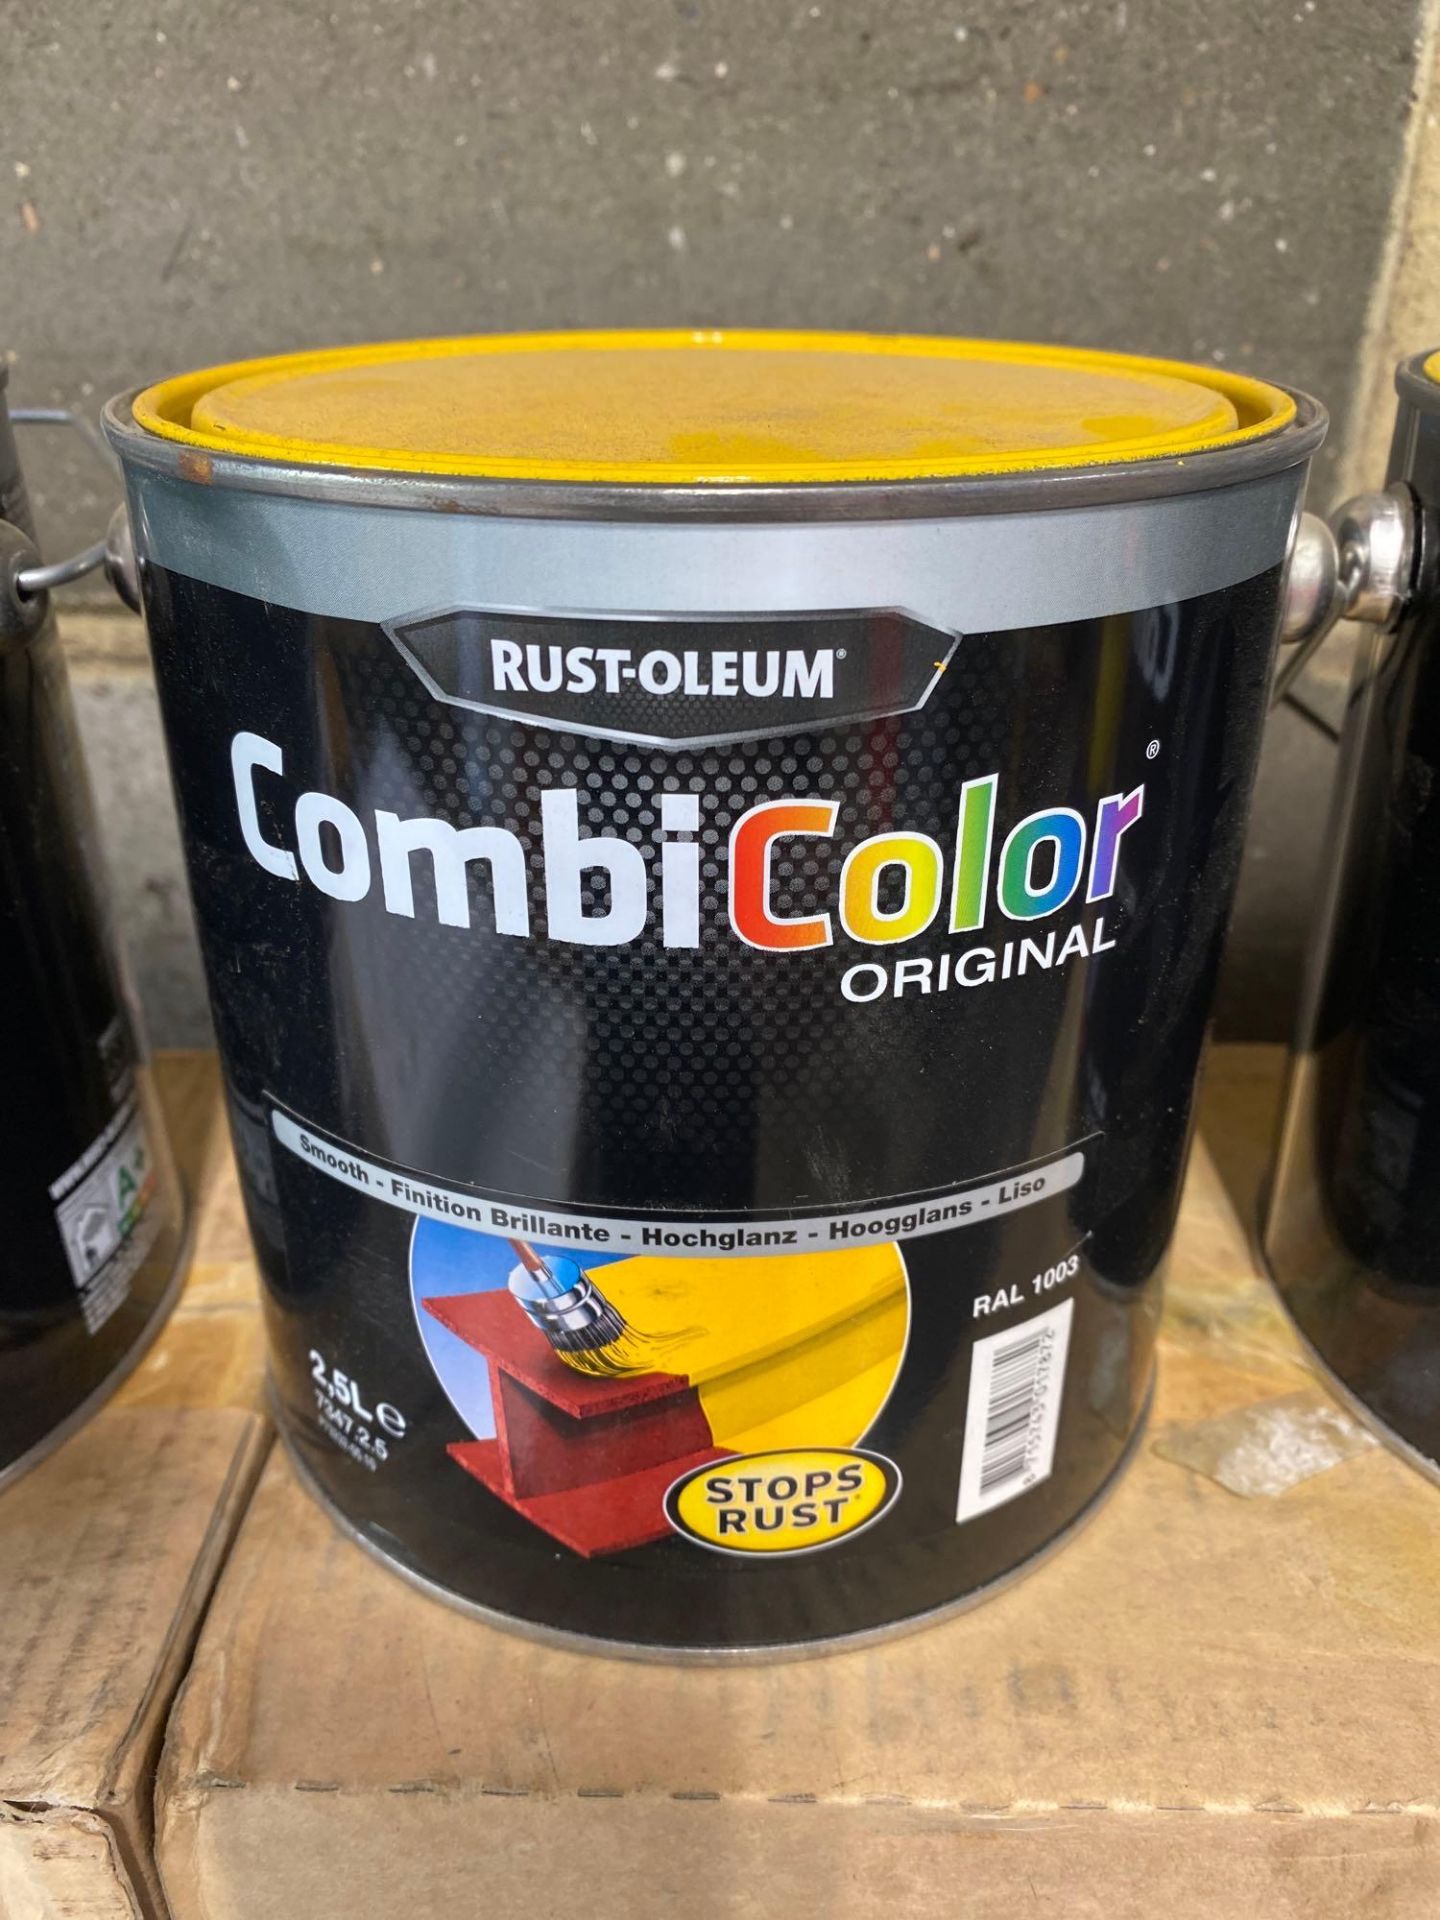 12 x 2.5L cans of rust-oleum Combi colour paint eight x yellow 4 x green ( unused ) - Image 2 of 2